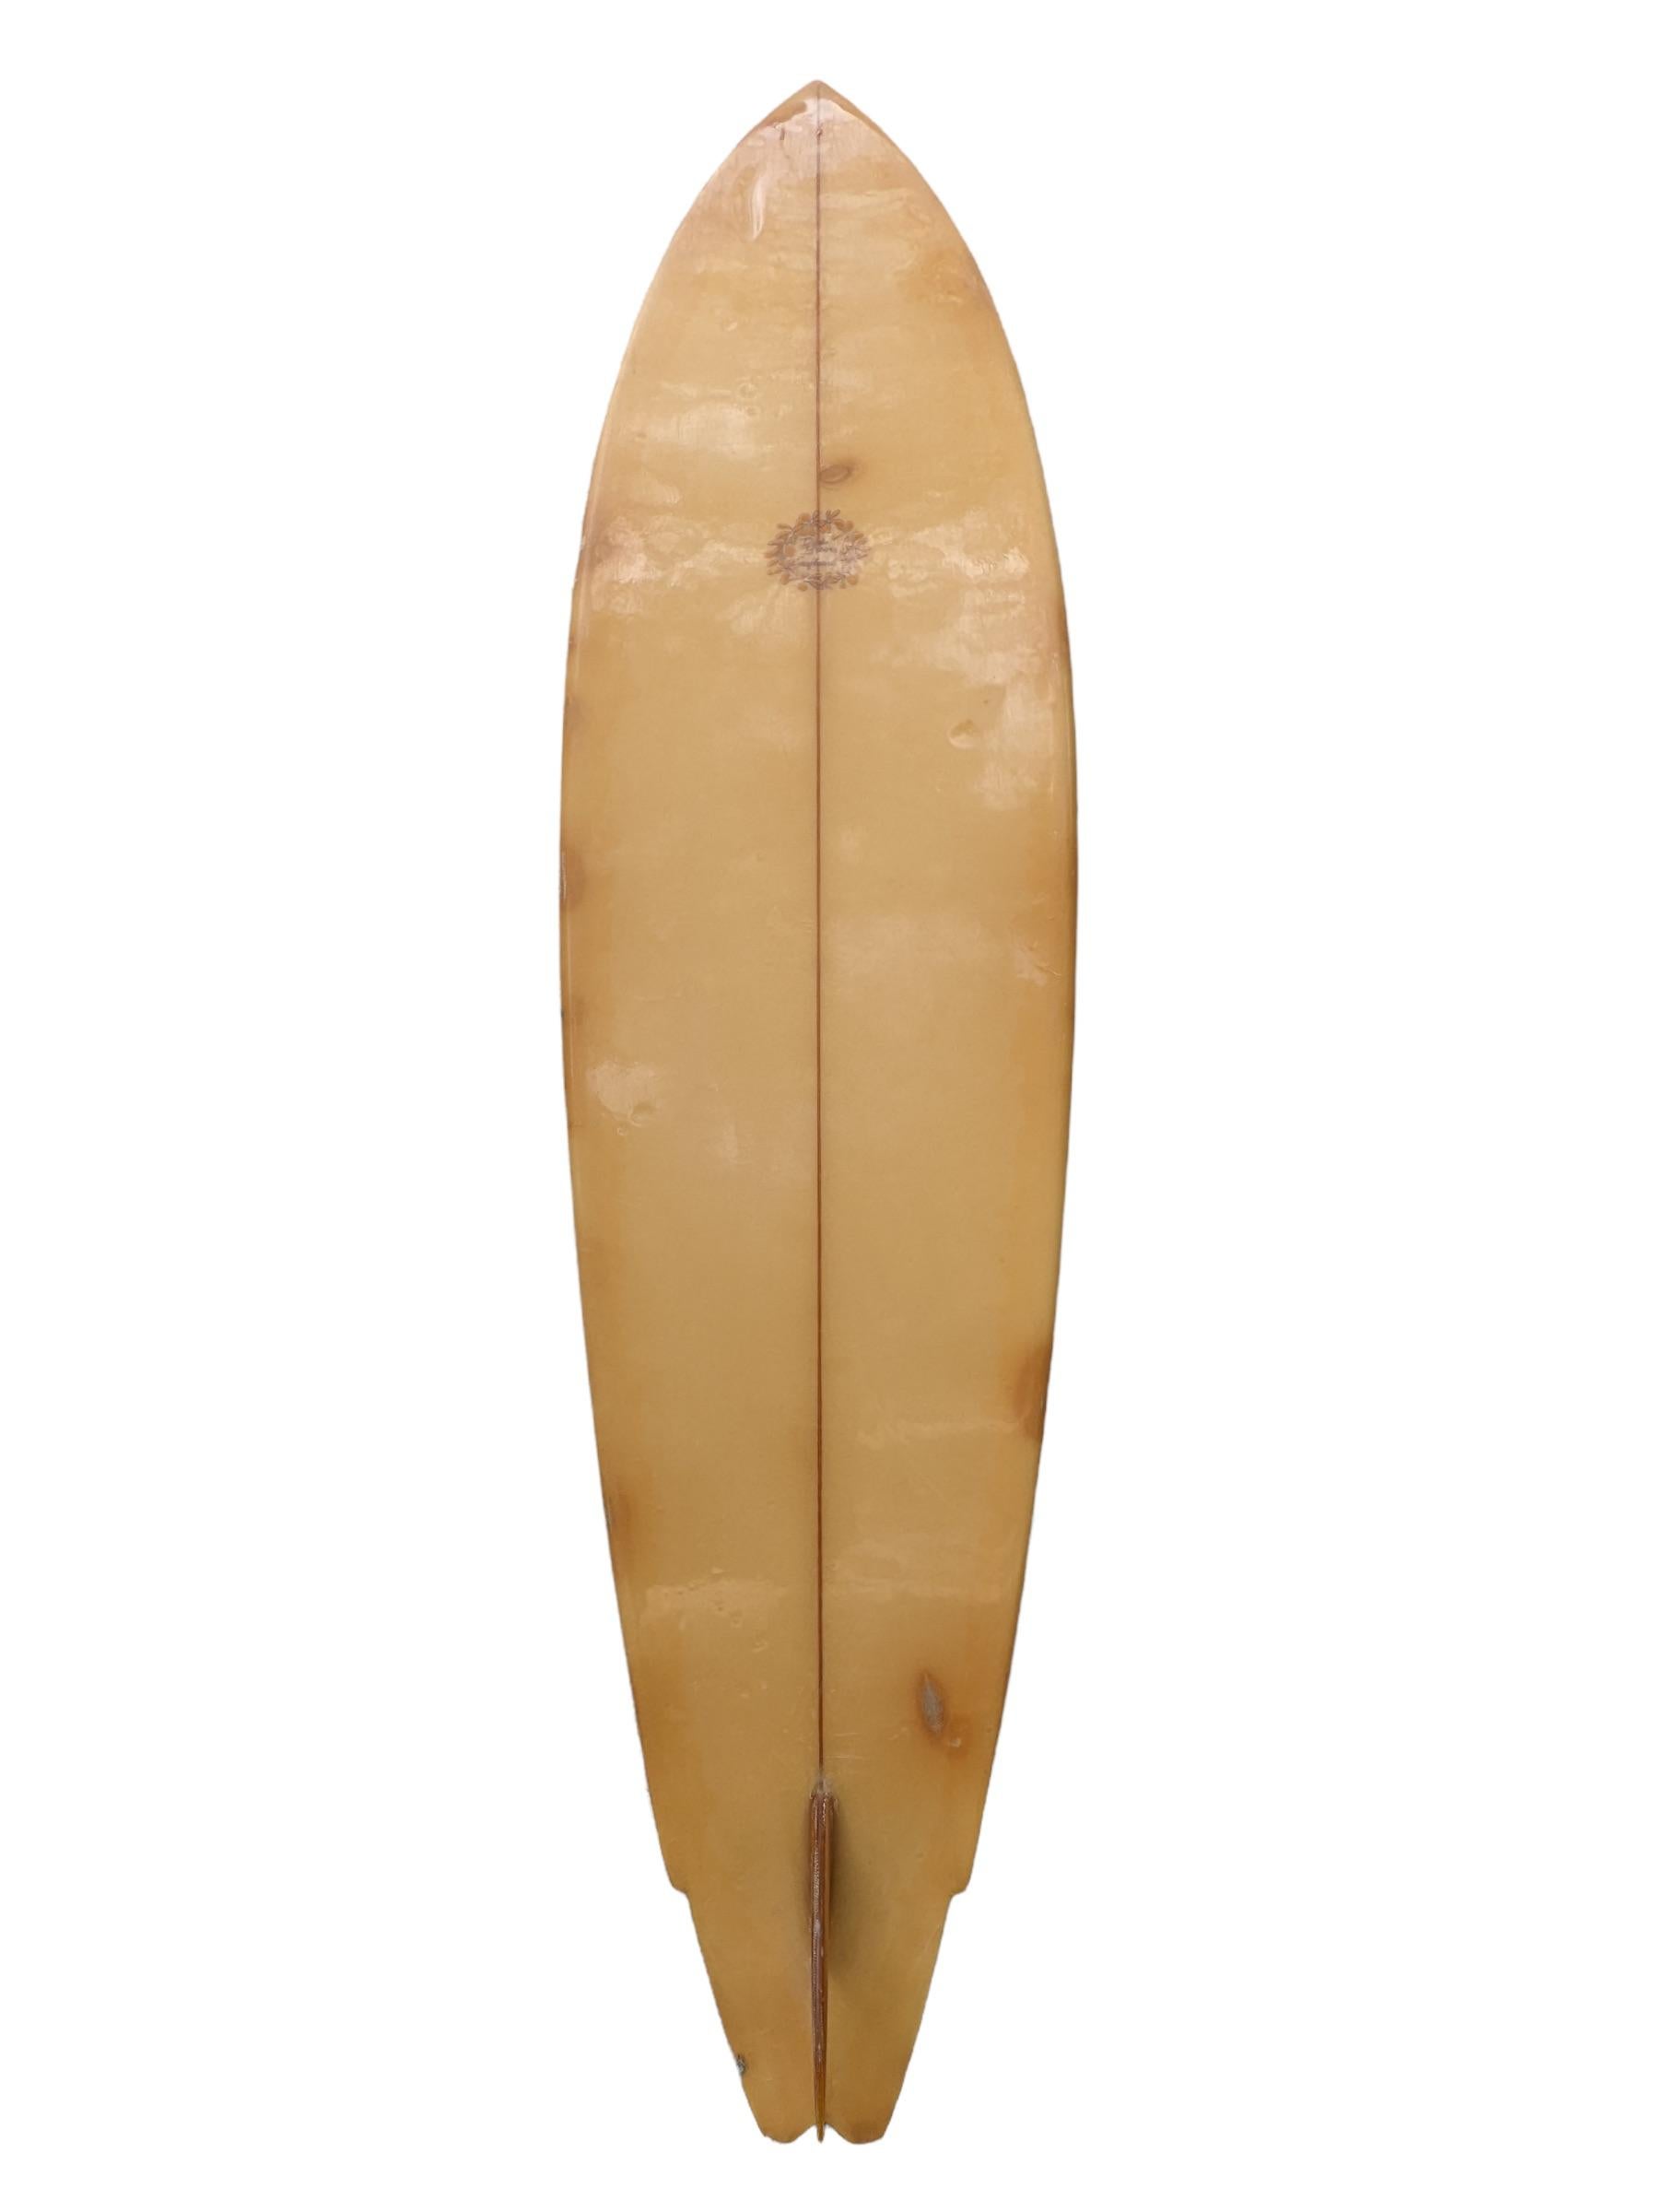 Late-1970s Dick Brewer surfboard made by Bob Ricard. Features a yellow tint with swallow tail winged shape design. Central pinstriping with pinstriped board outline and glassed-on single fin. A beautiful 70s shortboard made under the revered Dick